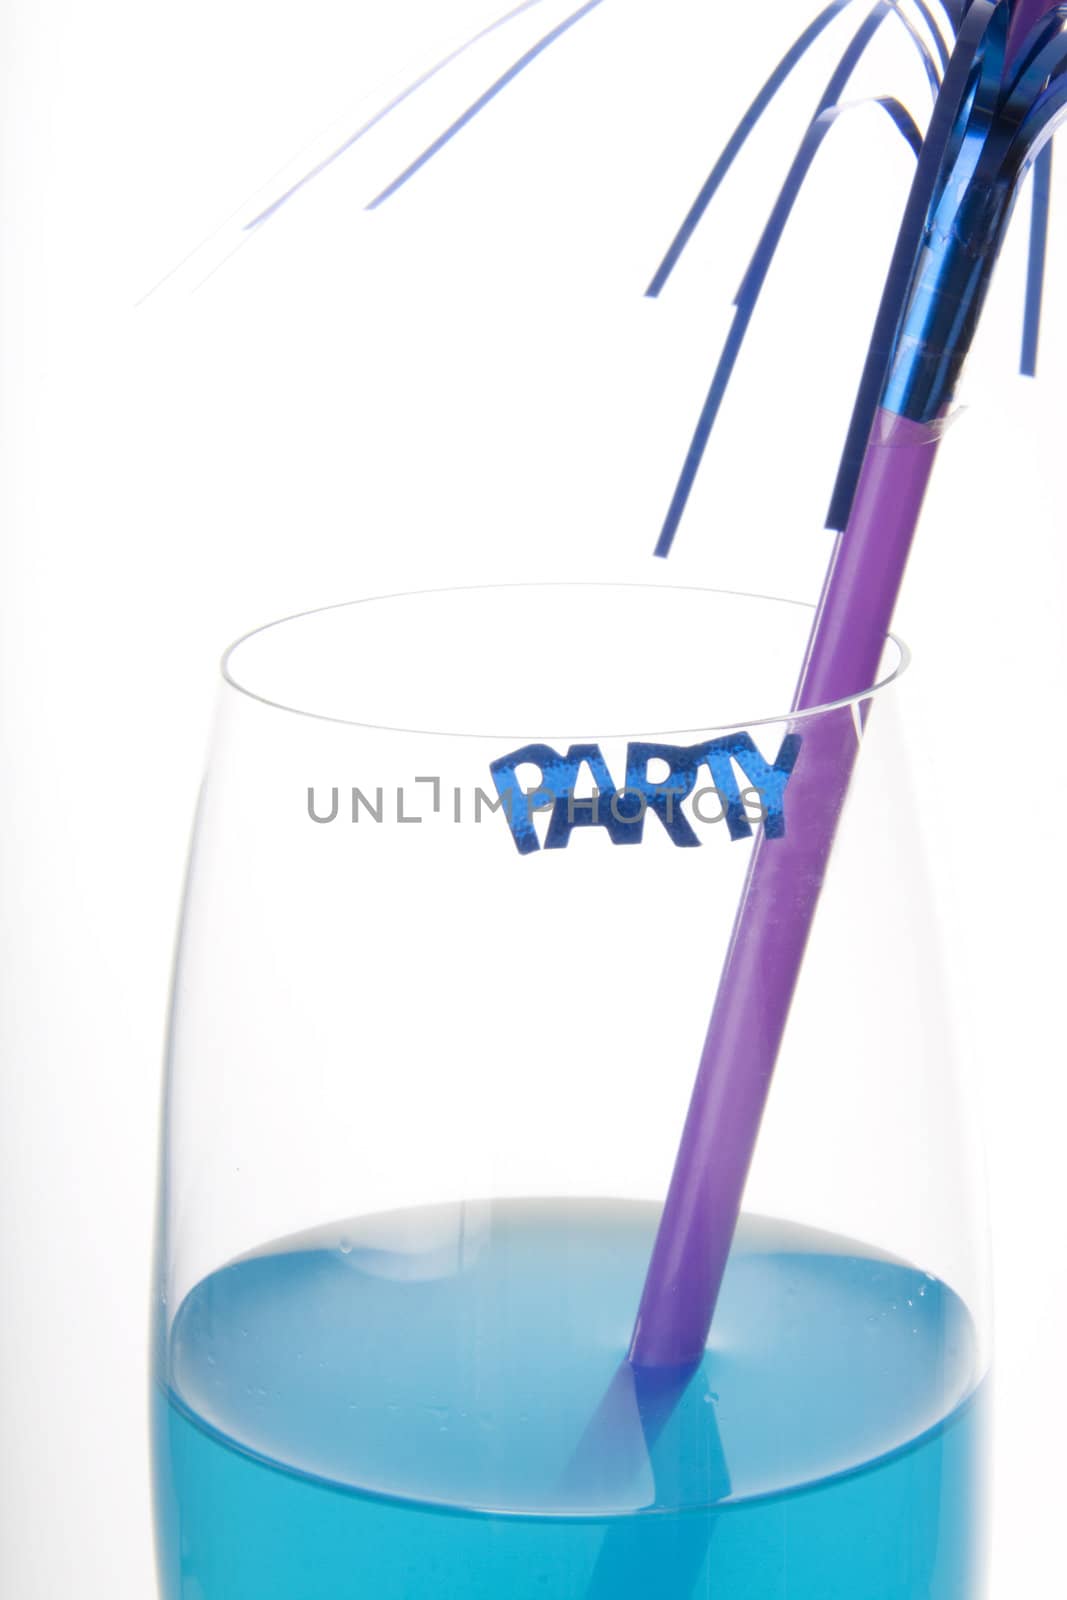 Blue party drink by kaferphoto